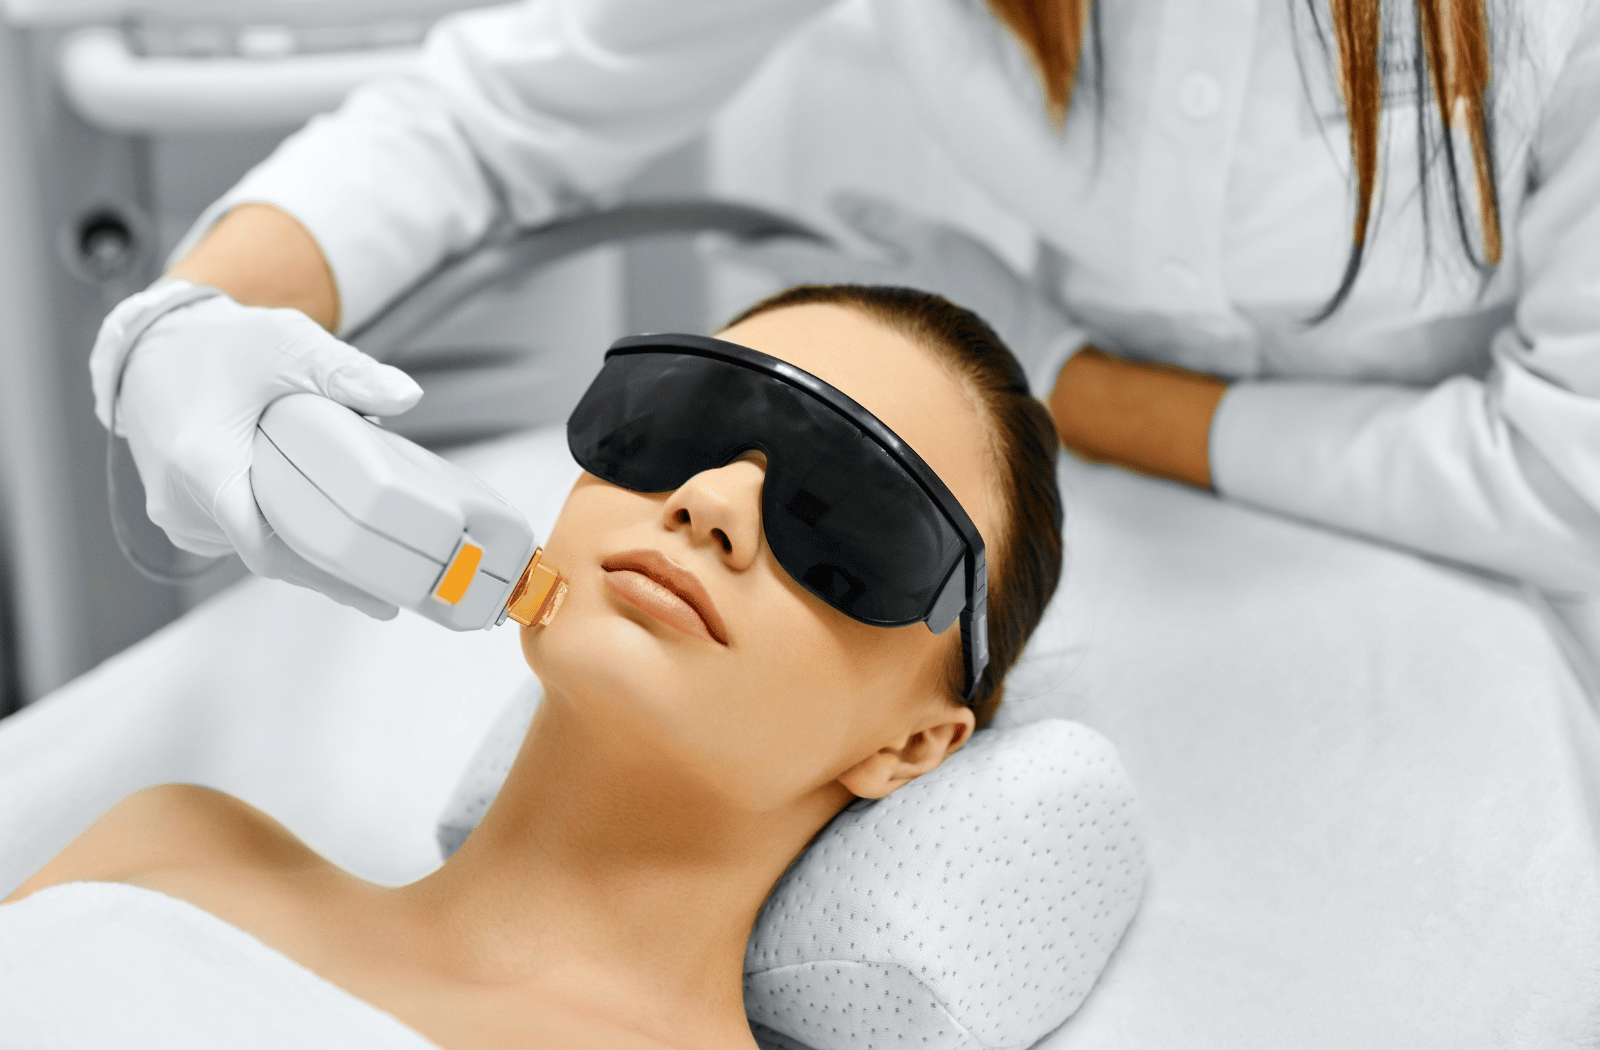 A woman receiving intense pulsed light therapy which can also help treat dry eye symptoms